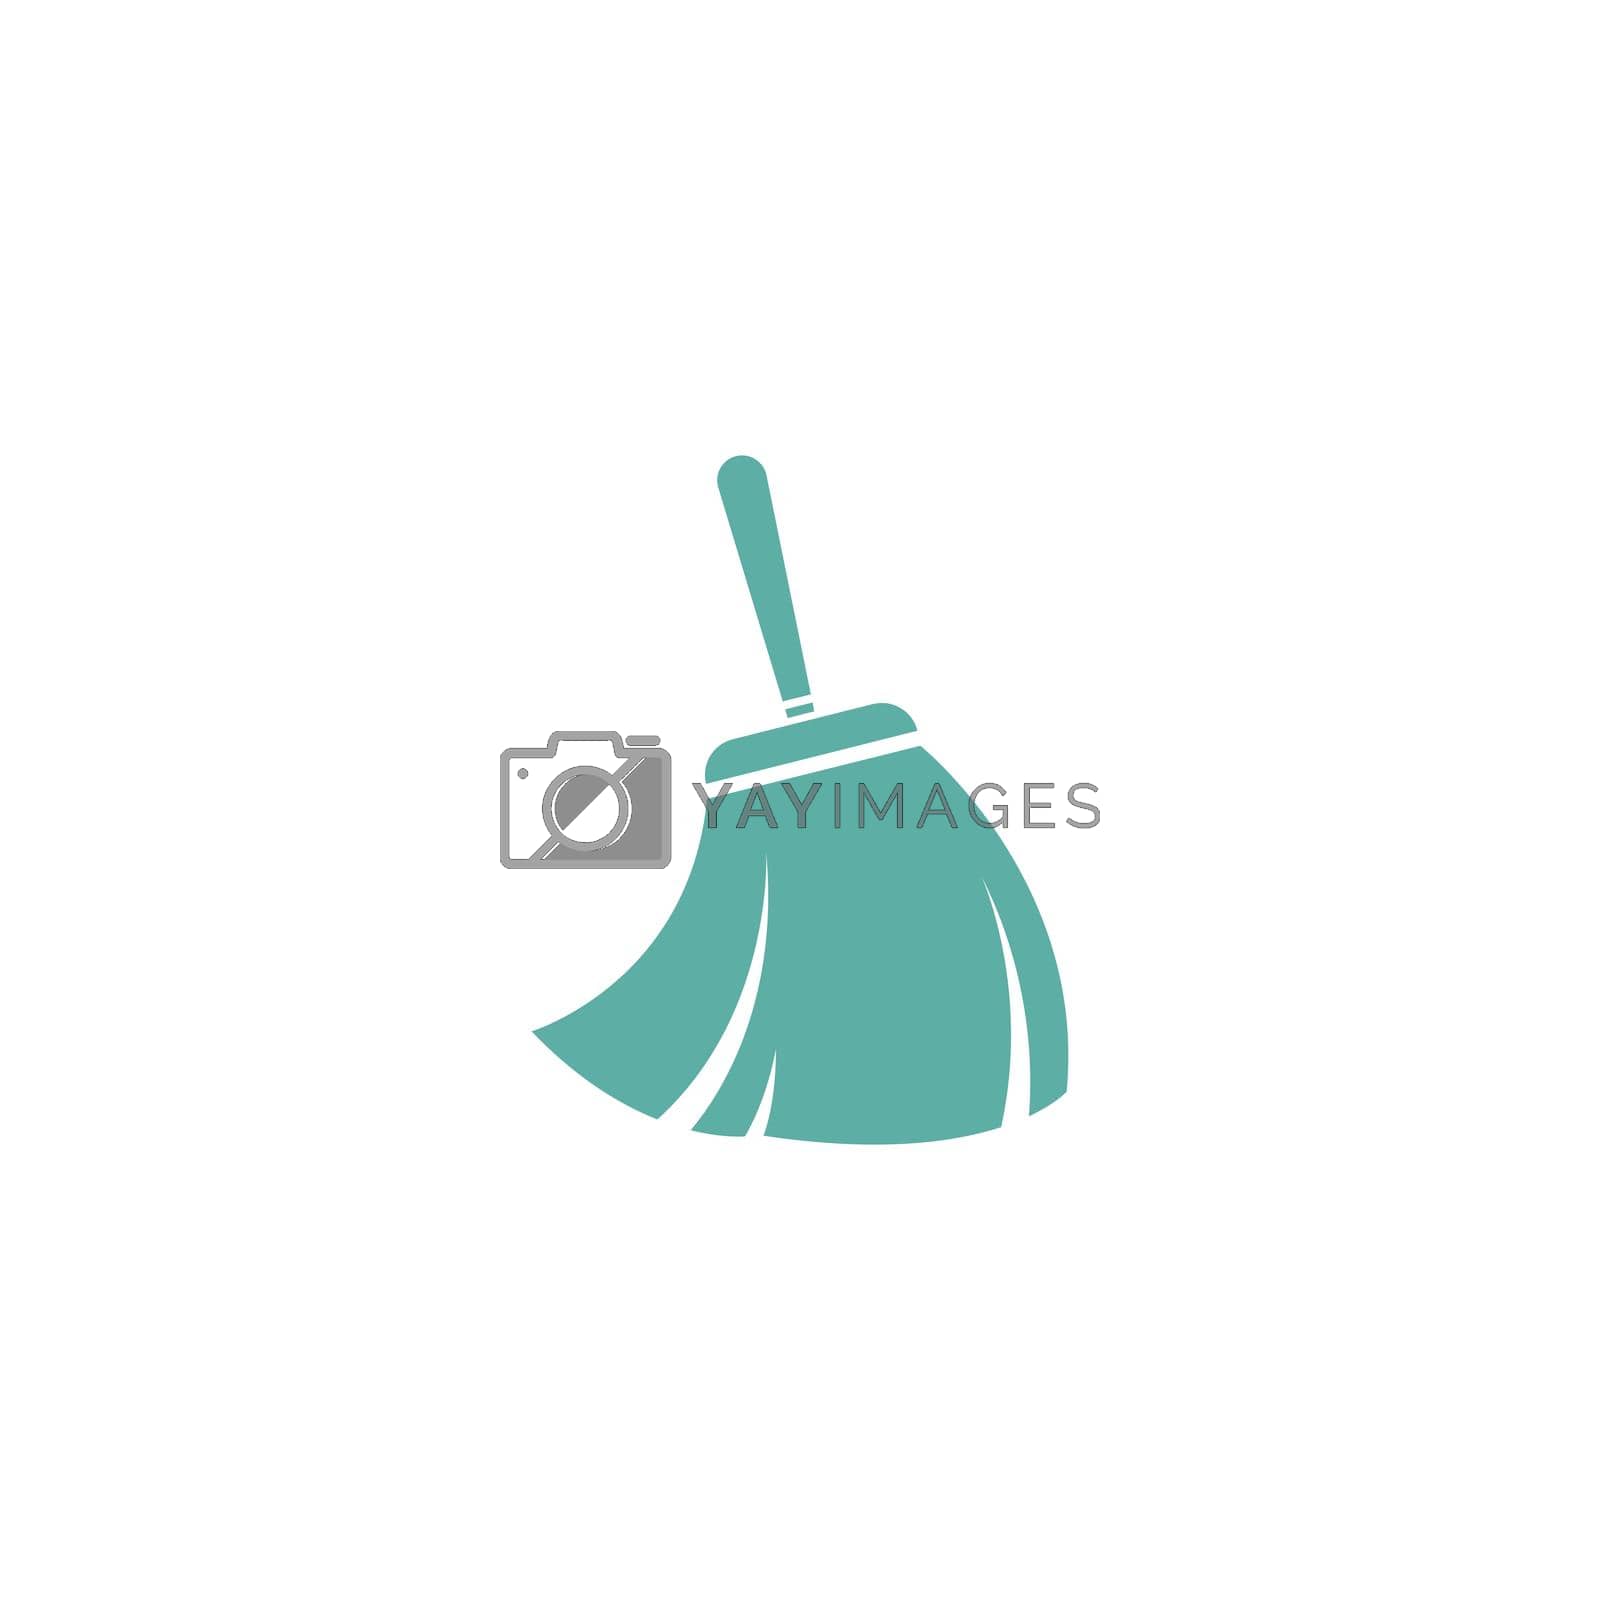 Royalty free image of Broom icon logo design illustration template by bellaxbudhong3